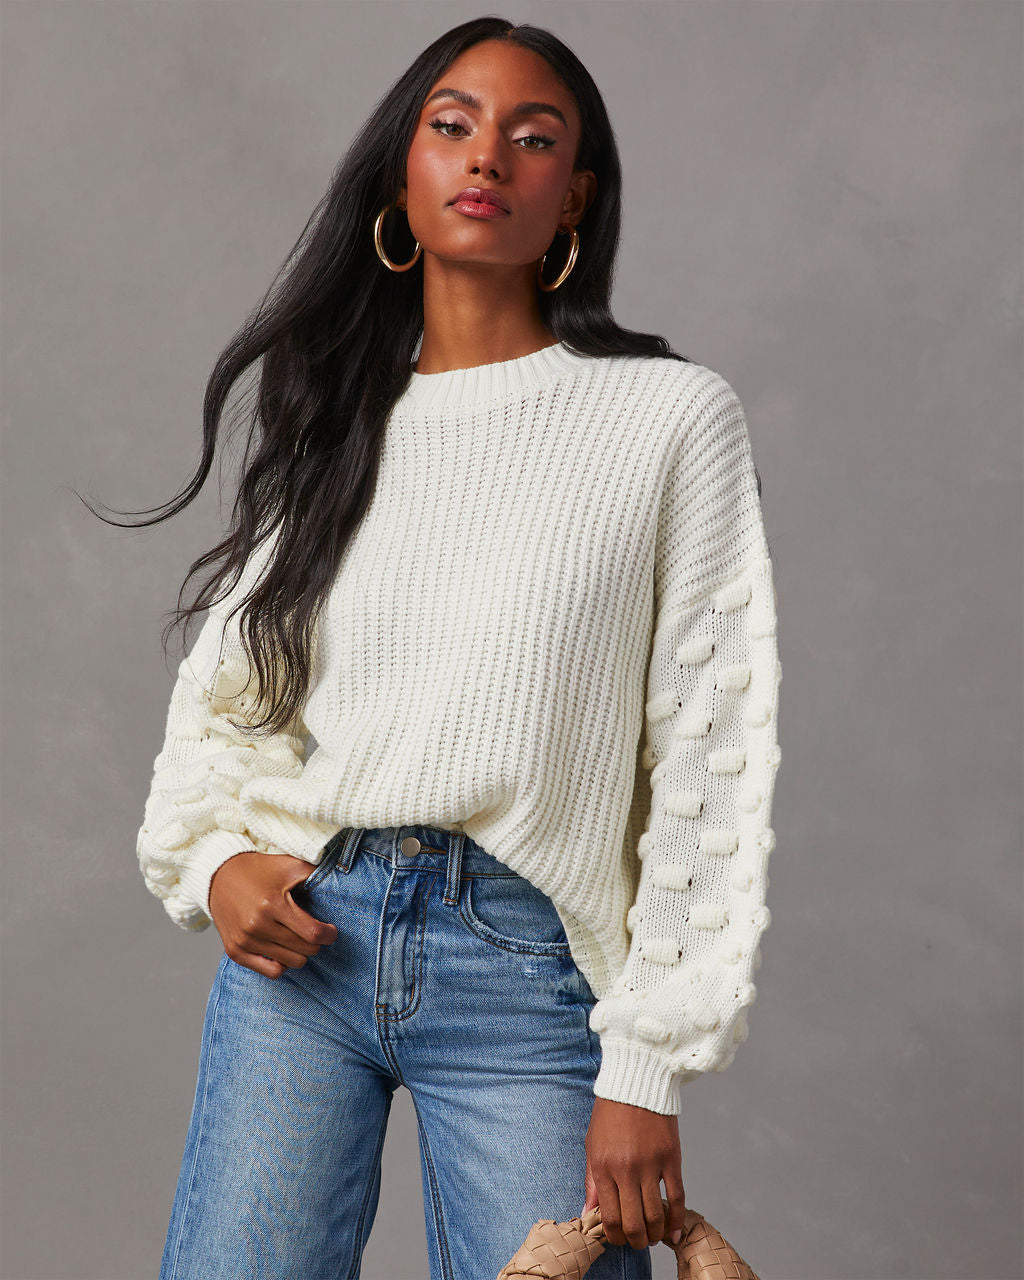 This  Knit Sweater With 6,600+ 5-Star Reviews Is on Sale